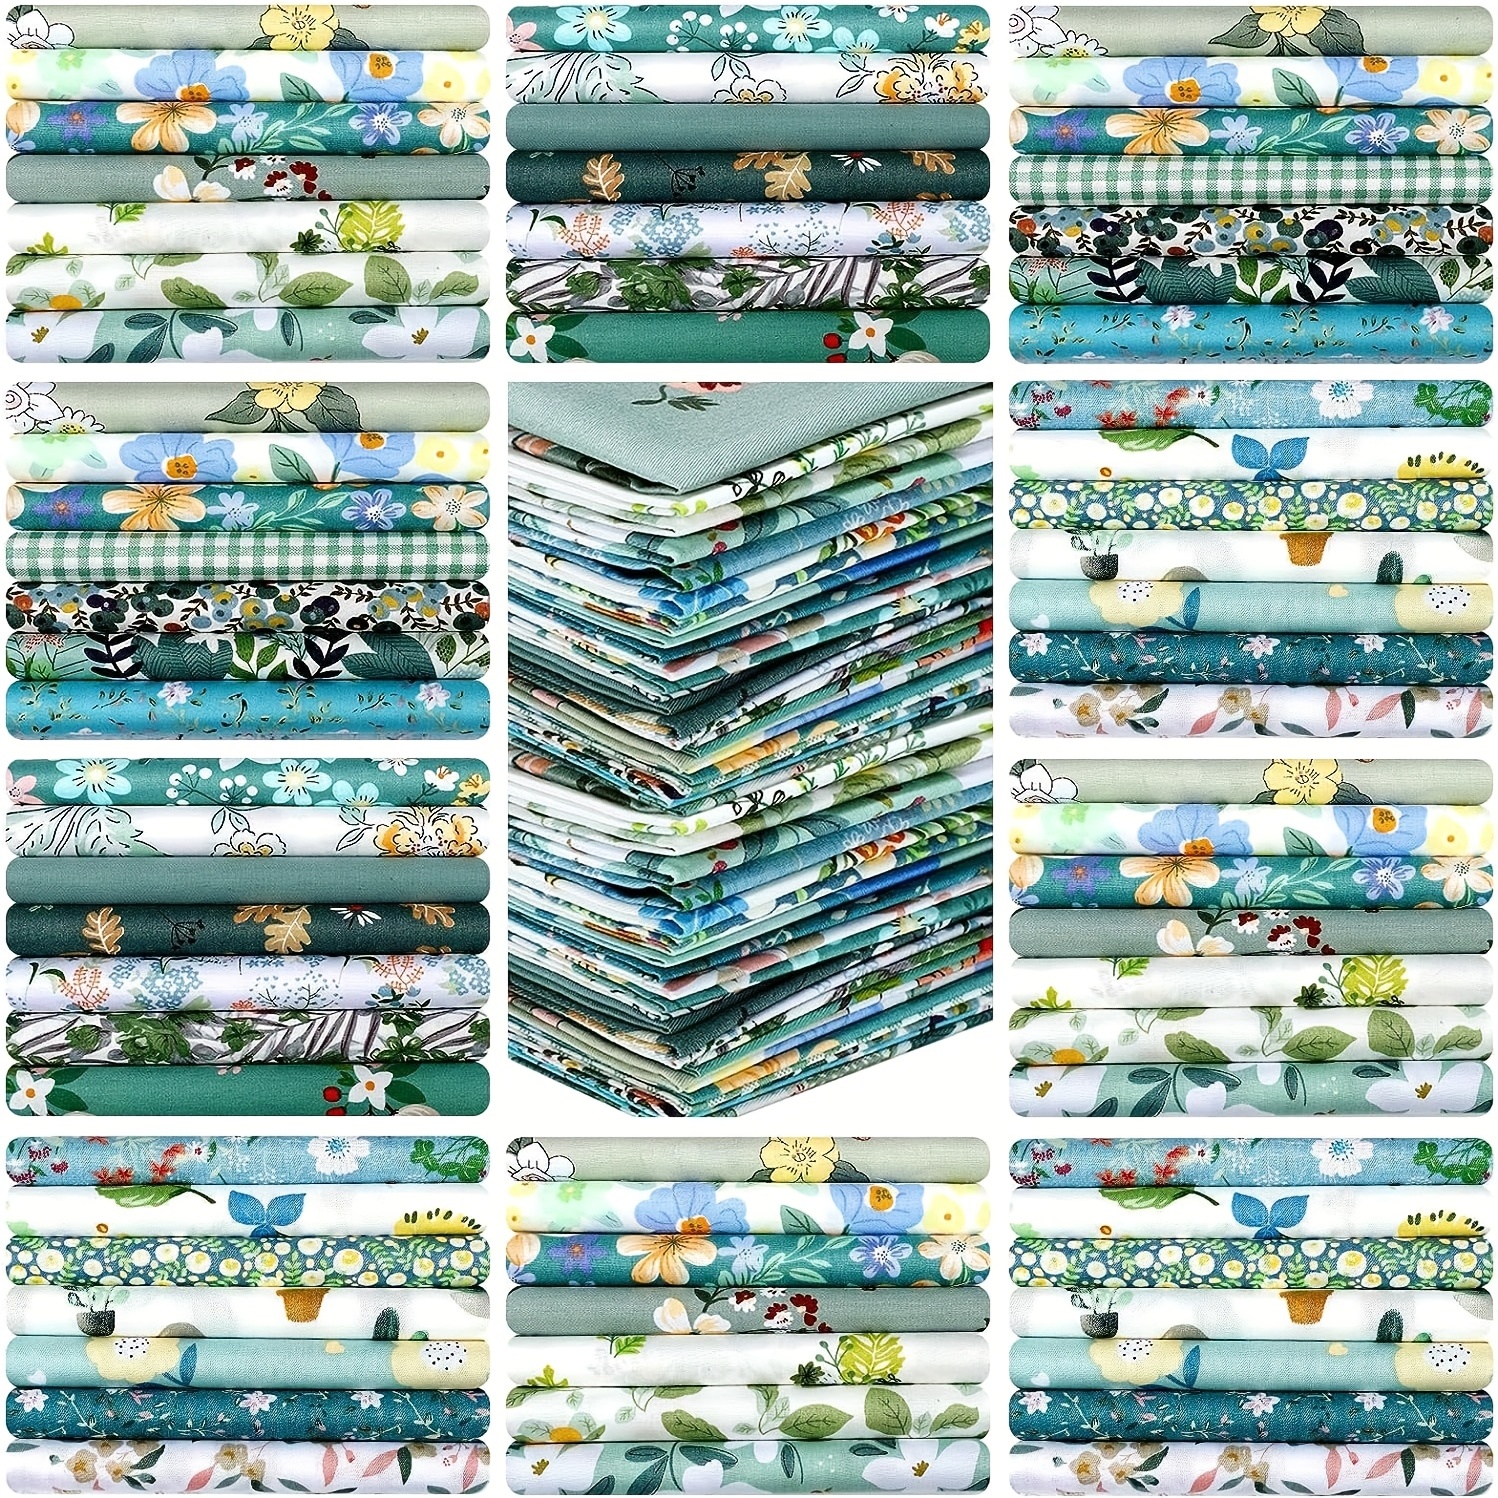 Cotton Quilting Fabric 10 Pcs 20 x 20 Fat Quarters Fabric Bundles Fabric  Squares for Quilting, DIY Sewing Project, Patchwork, Misscrafts